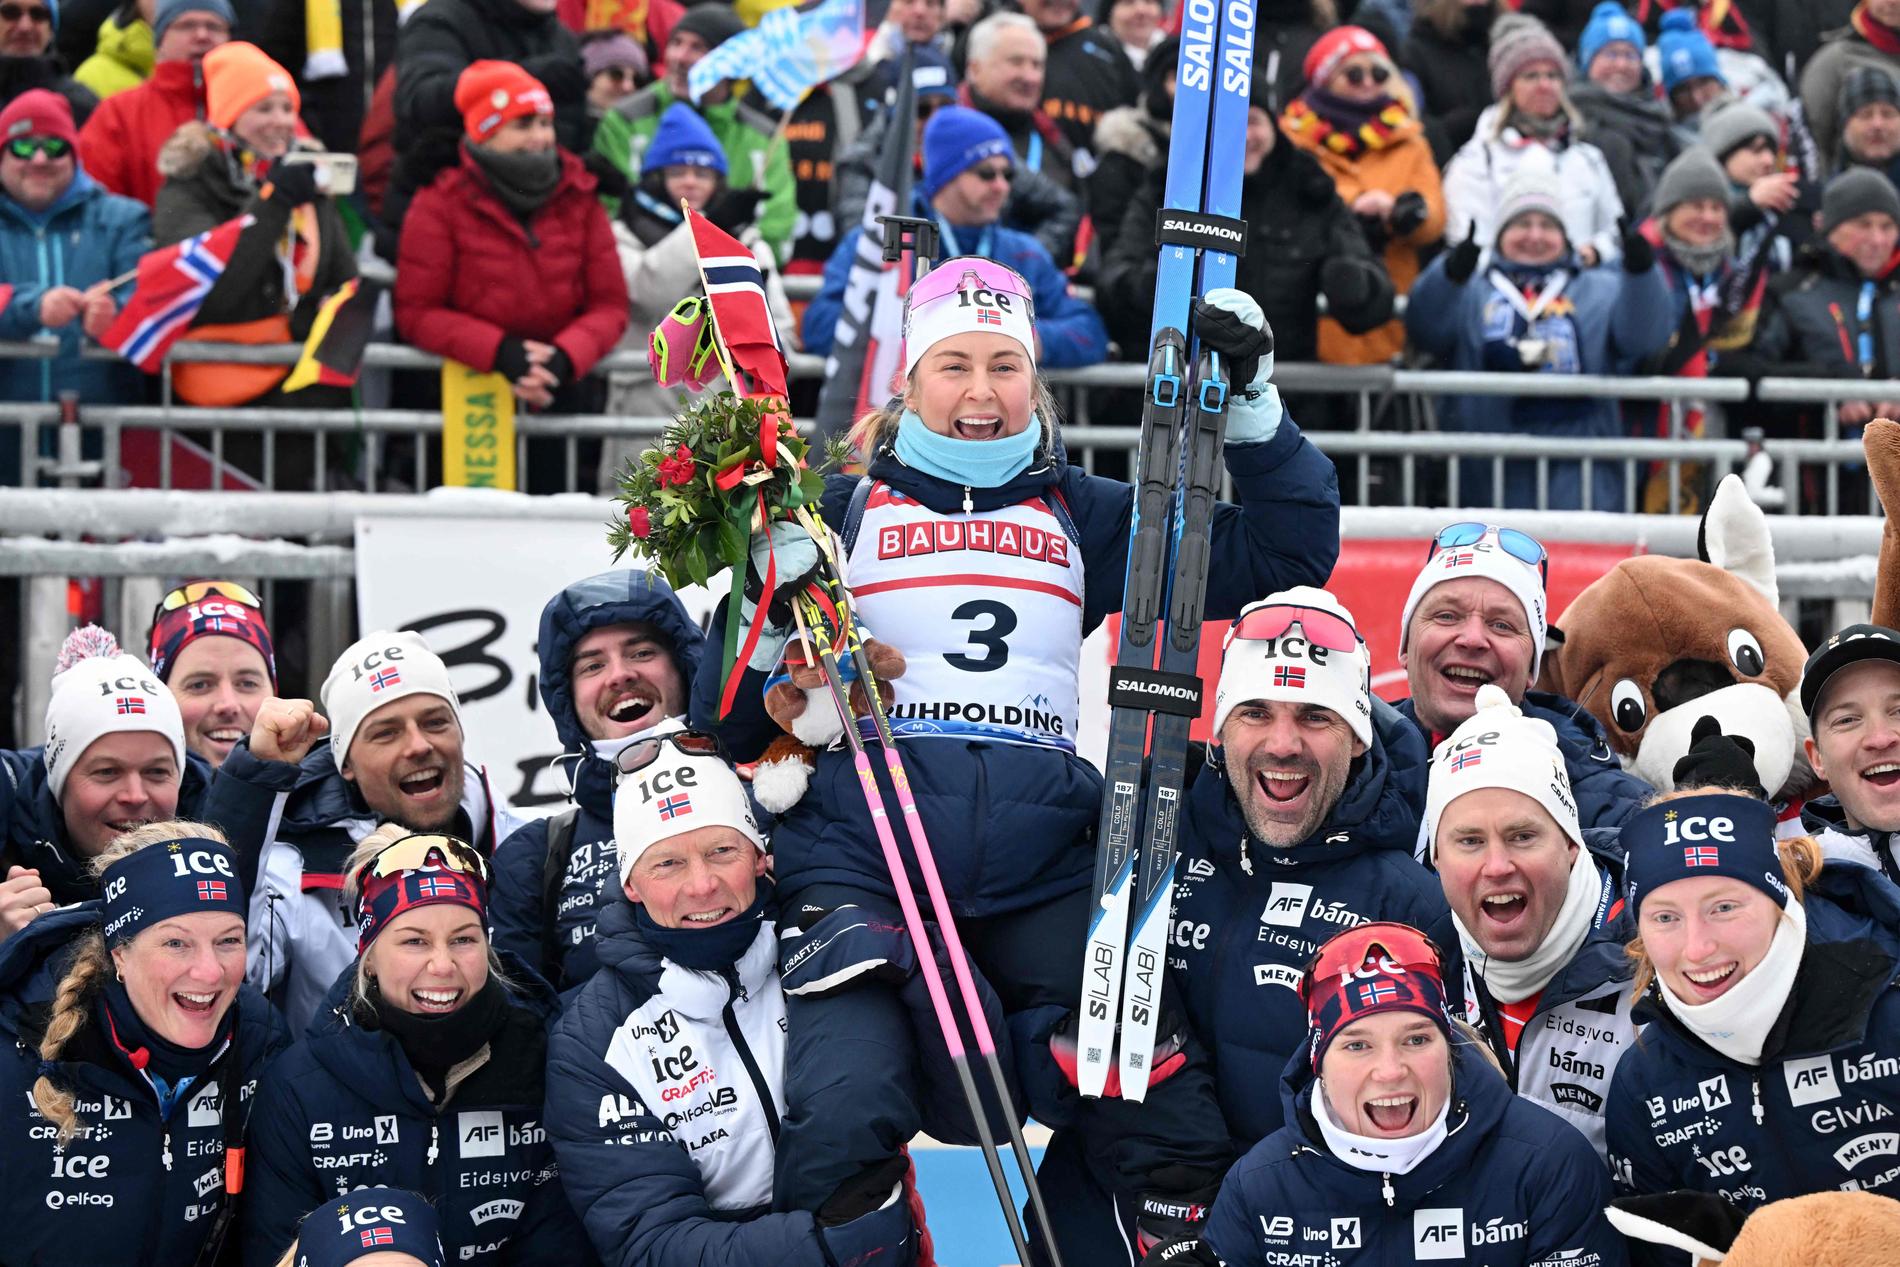 Promising to soar to new heights: Ingrid Landmark Tandrifold won the sprint race on Friday, and joined the entire team in cheering afterward.